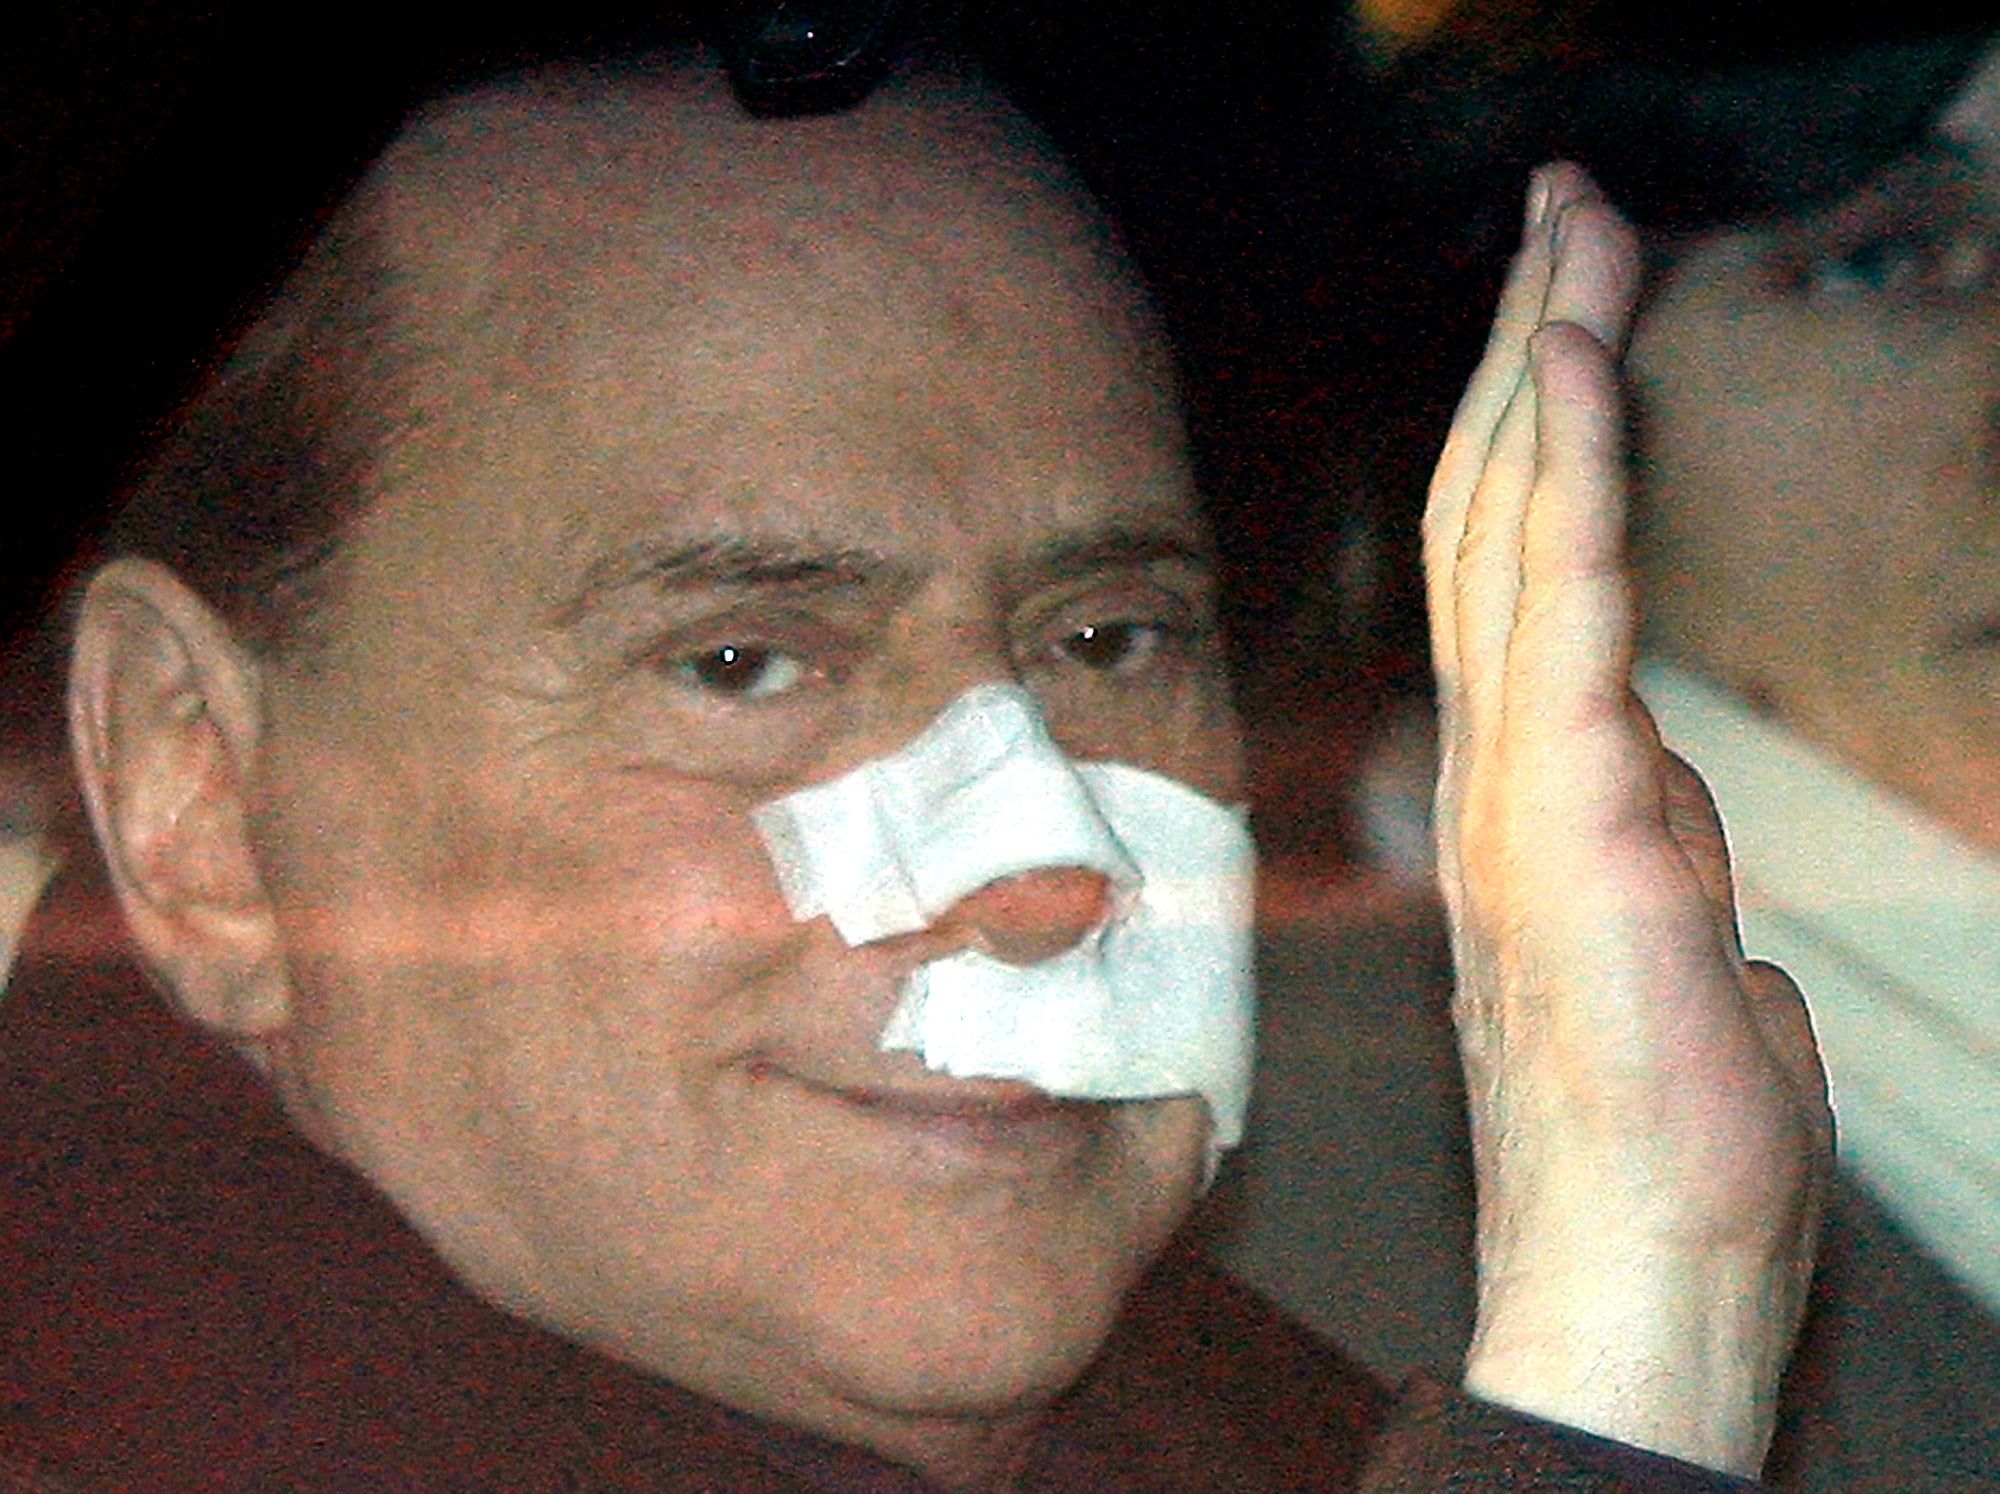 Berlusconi waves from his car as he arrives at his home, with his face covered in bandages, four days after an attack at a political rally in December 2009